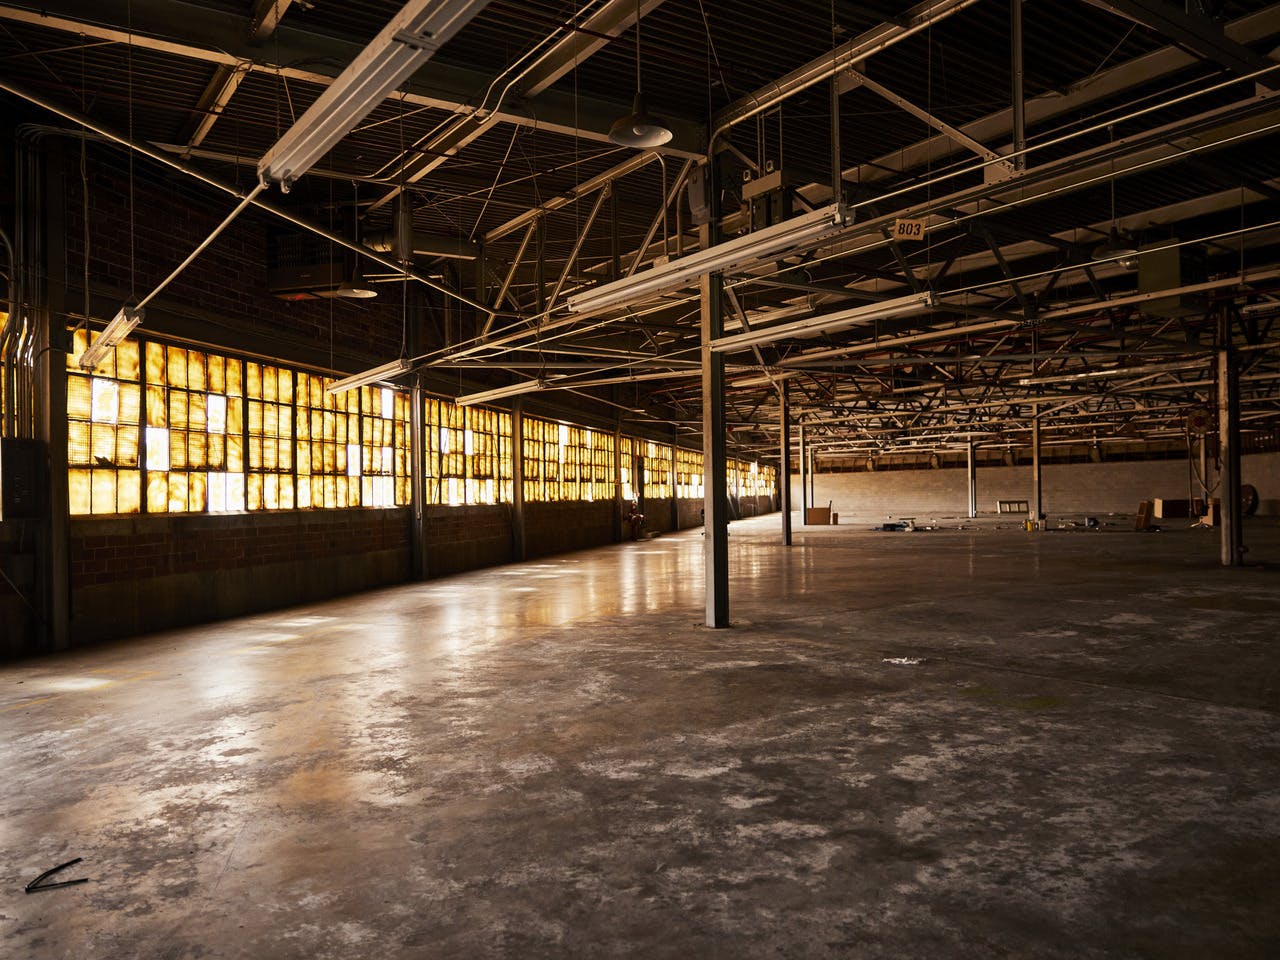 The inside of an abandoned warehouse with sun spilling in the broken windows.